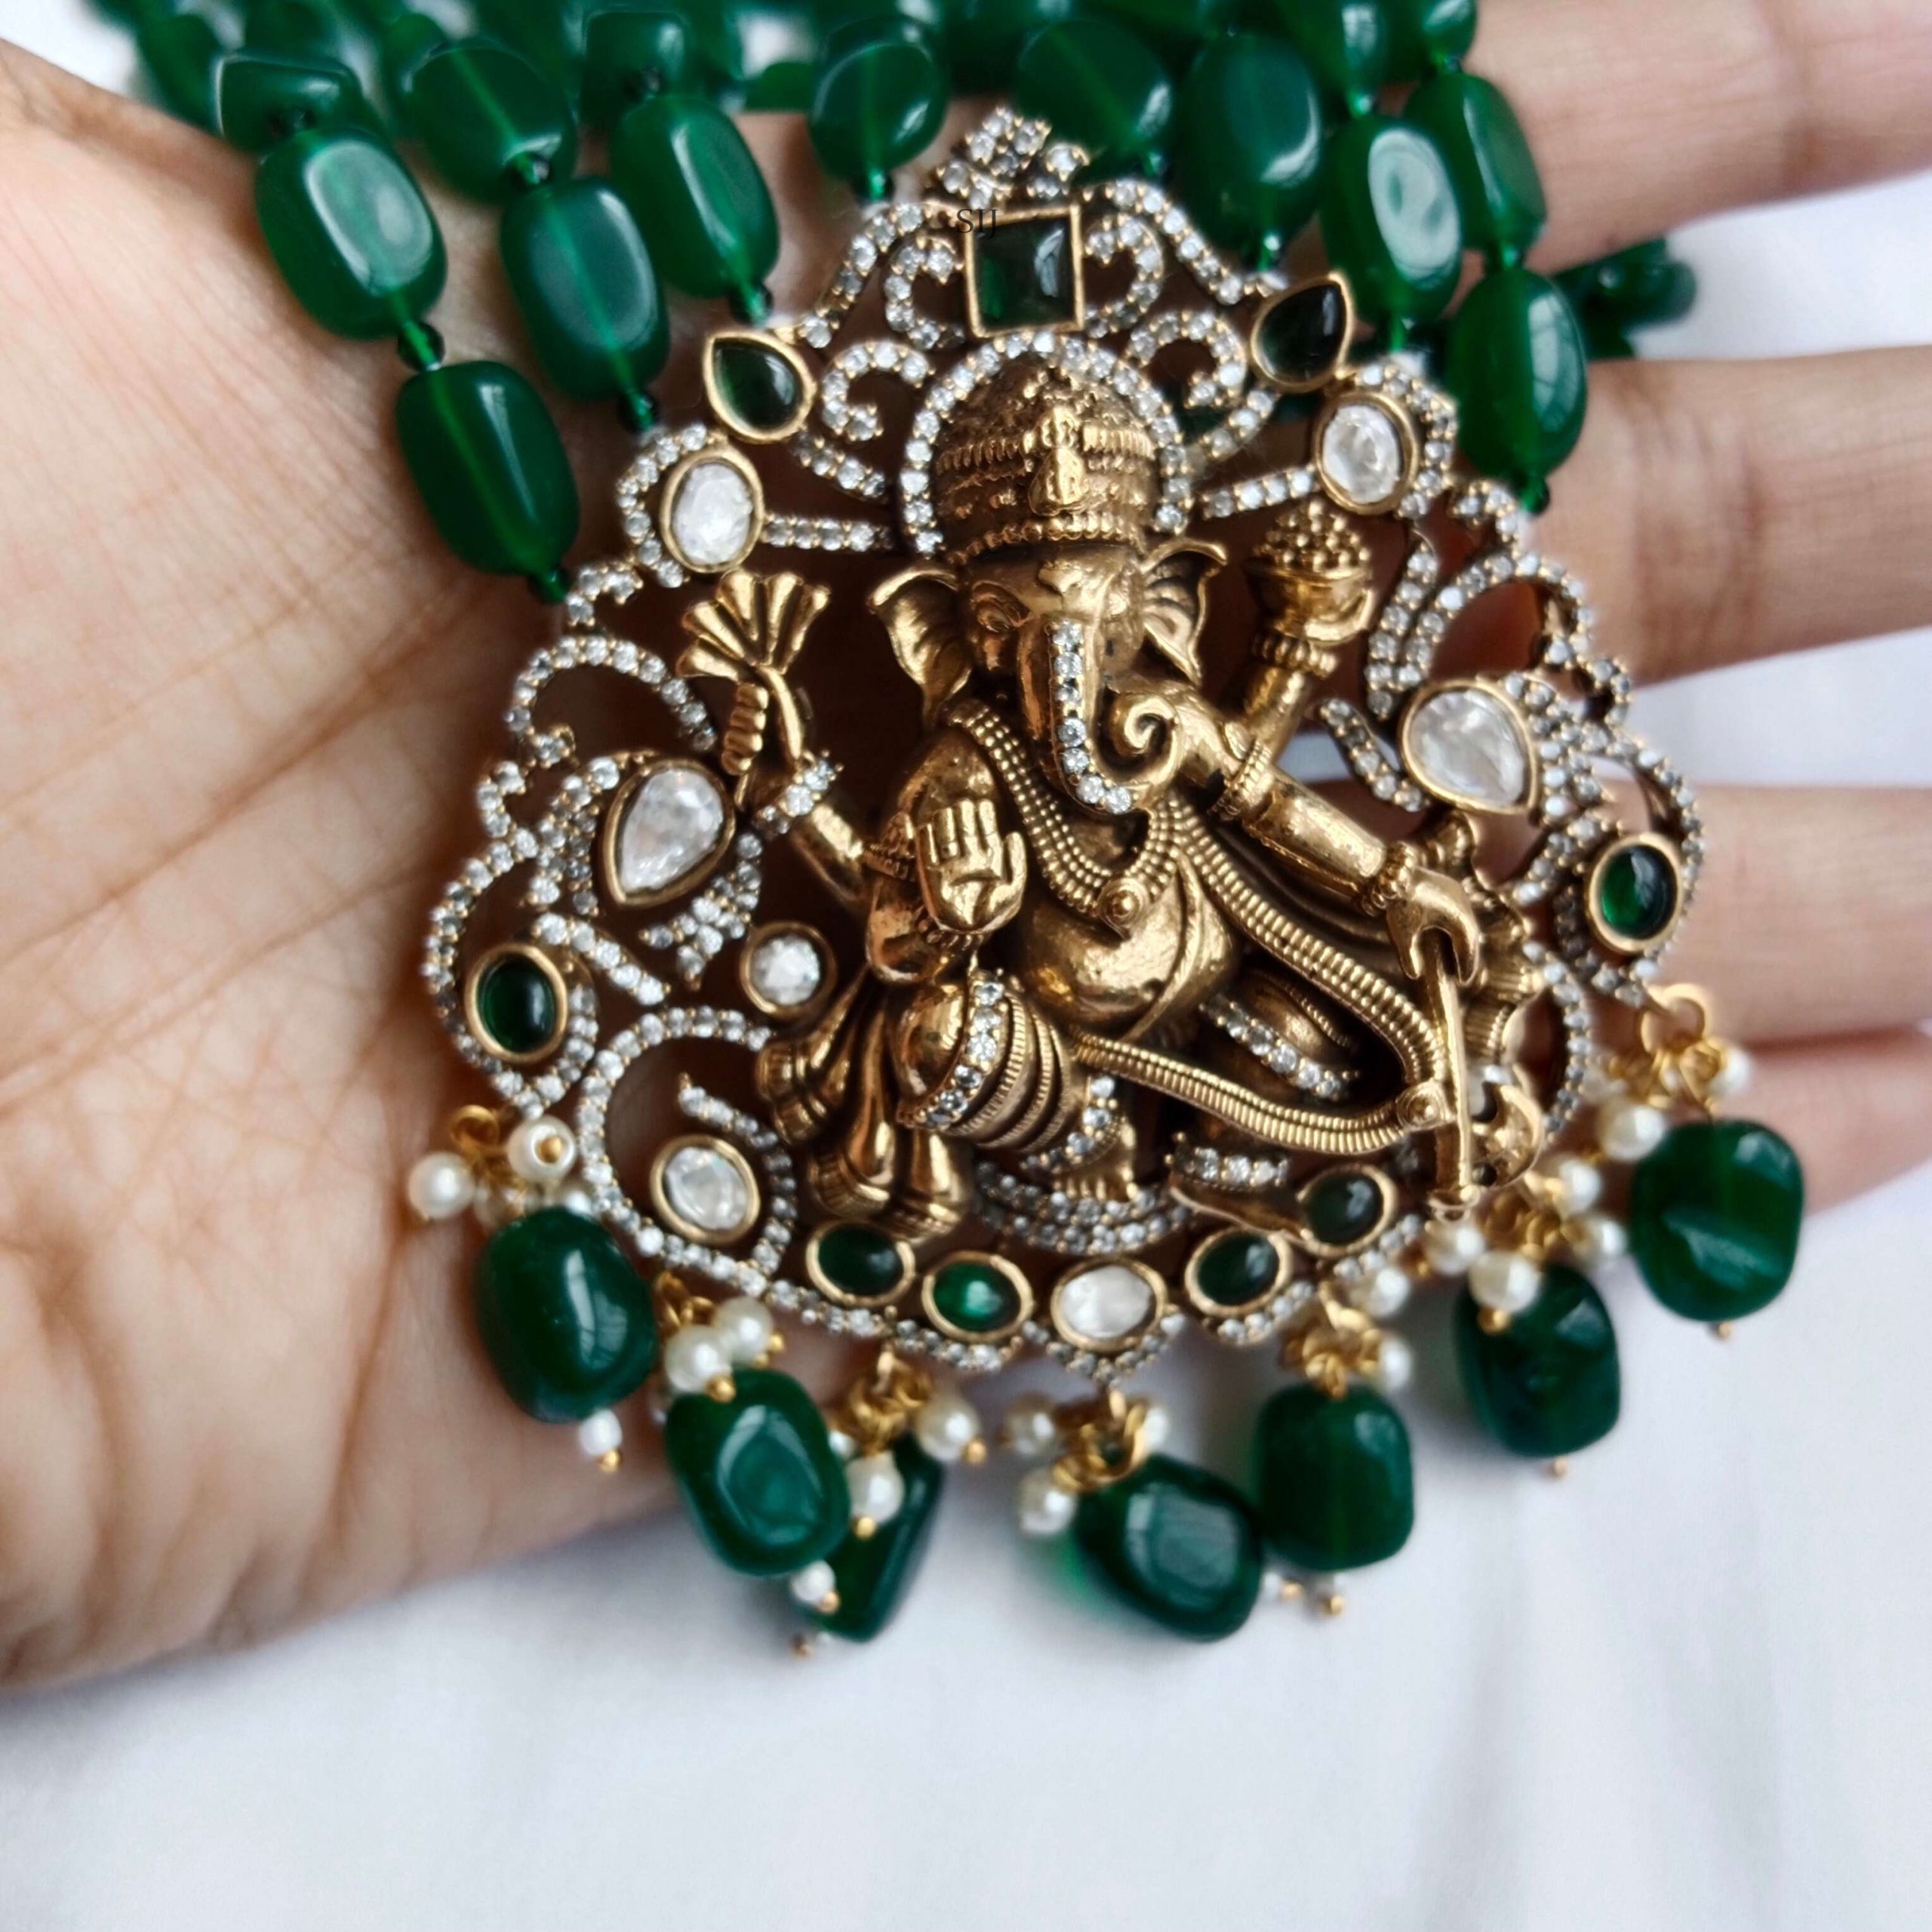 Four Layers Green Beads Haram with Victorian Ganesh Pendant